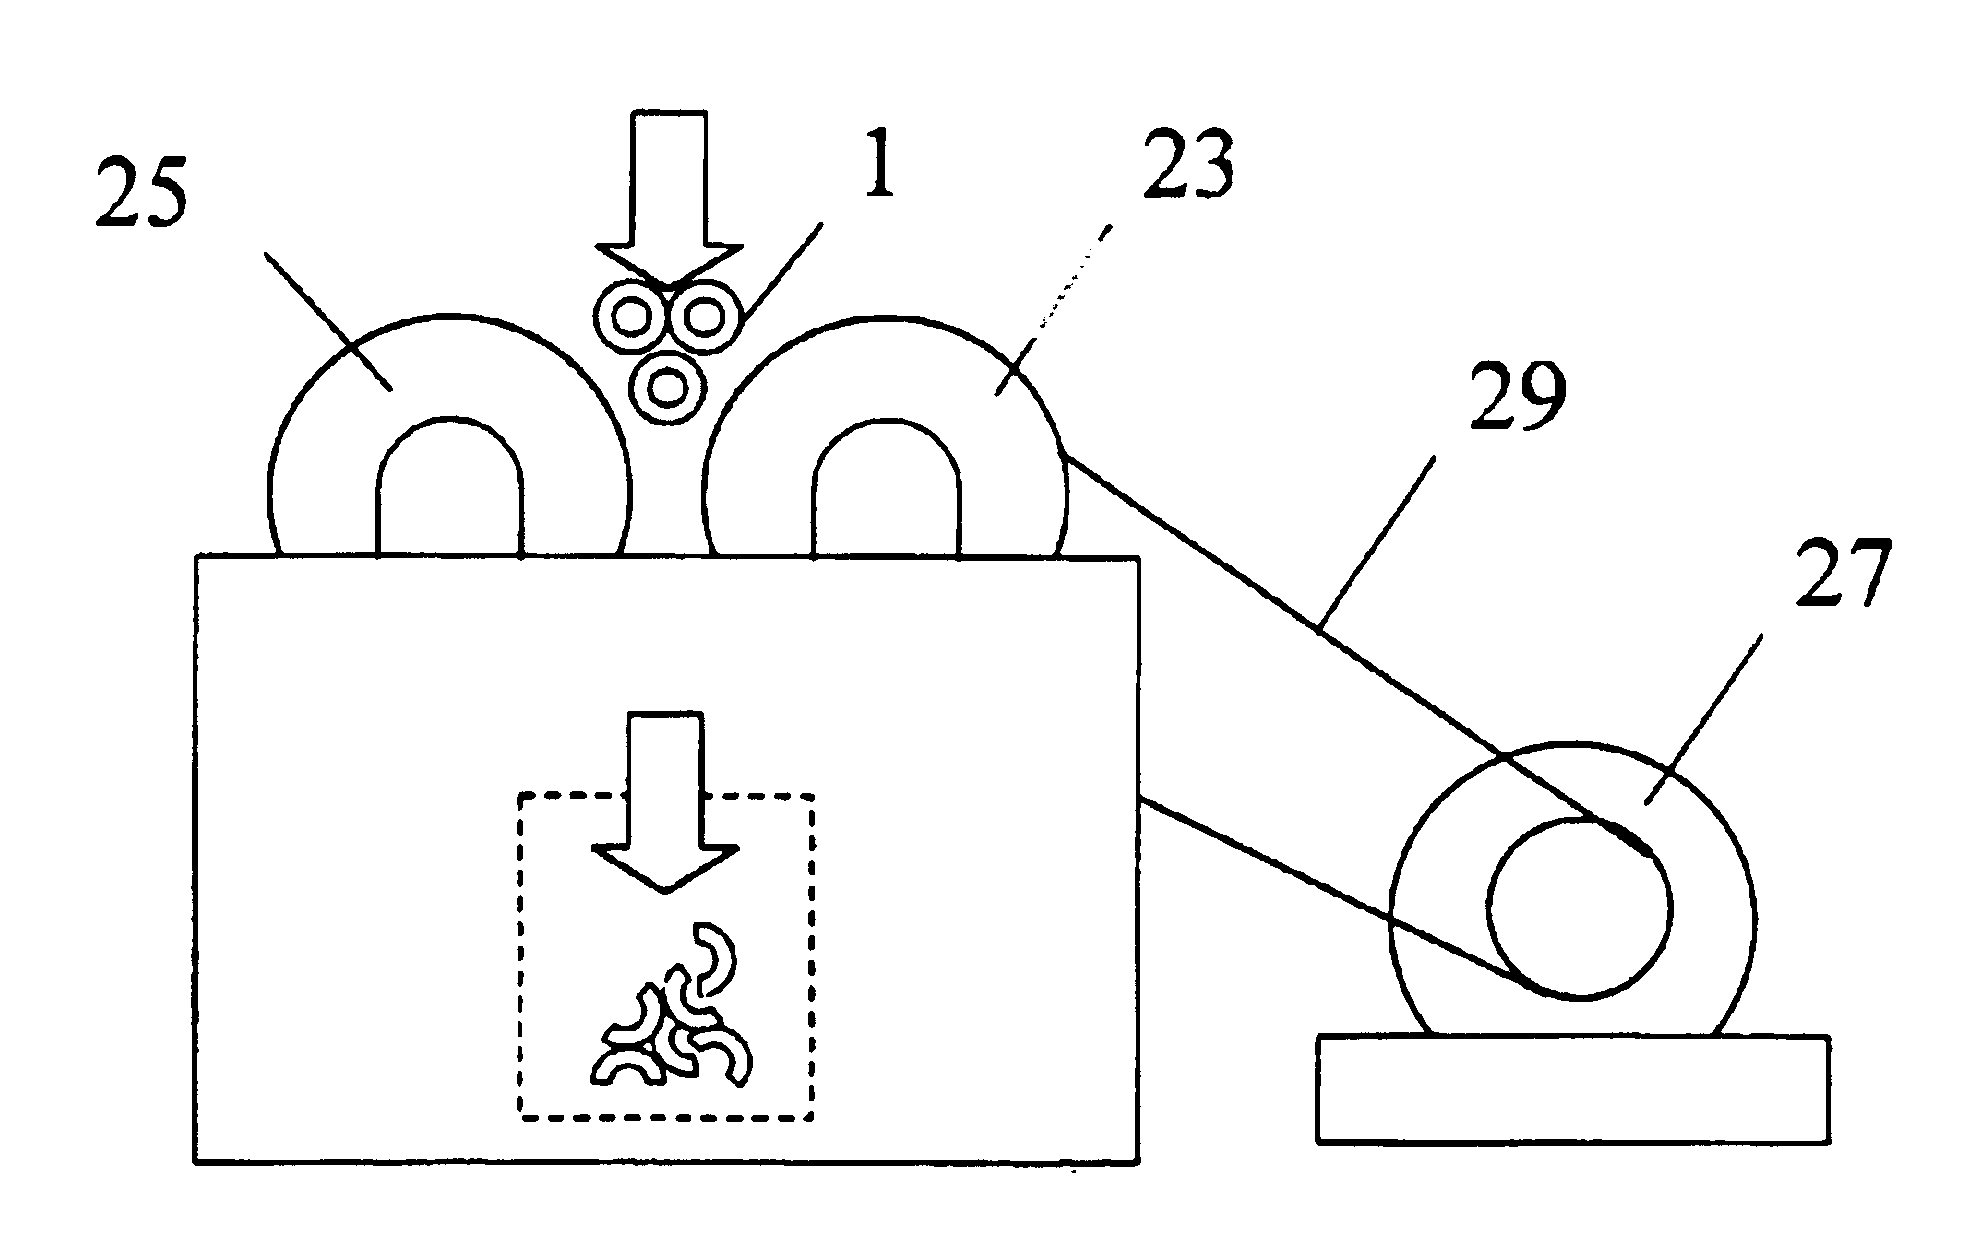 Method for recovering fluorescent material from faulty glass bodies of discharge lamps